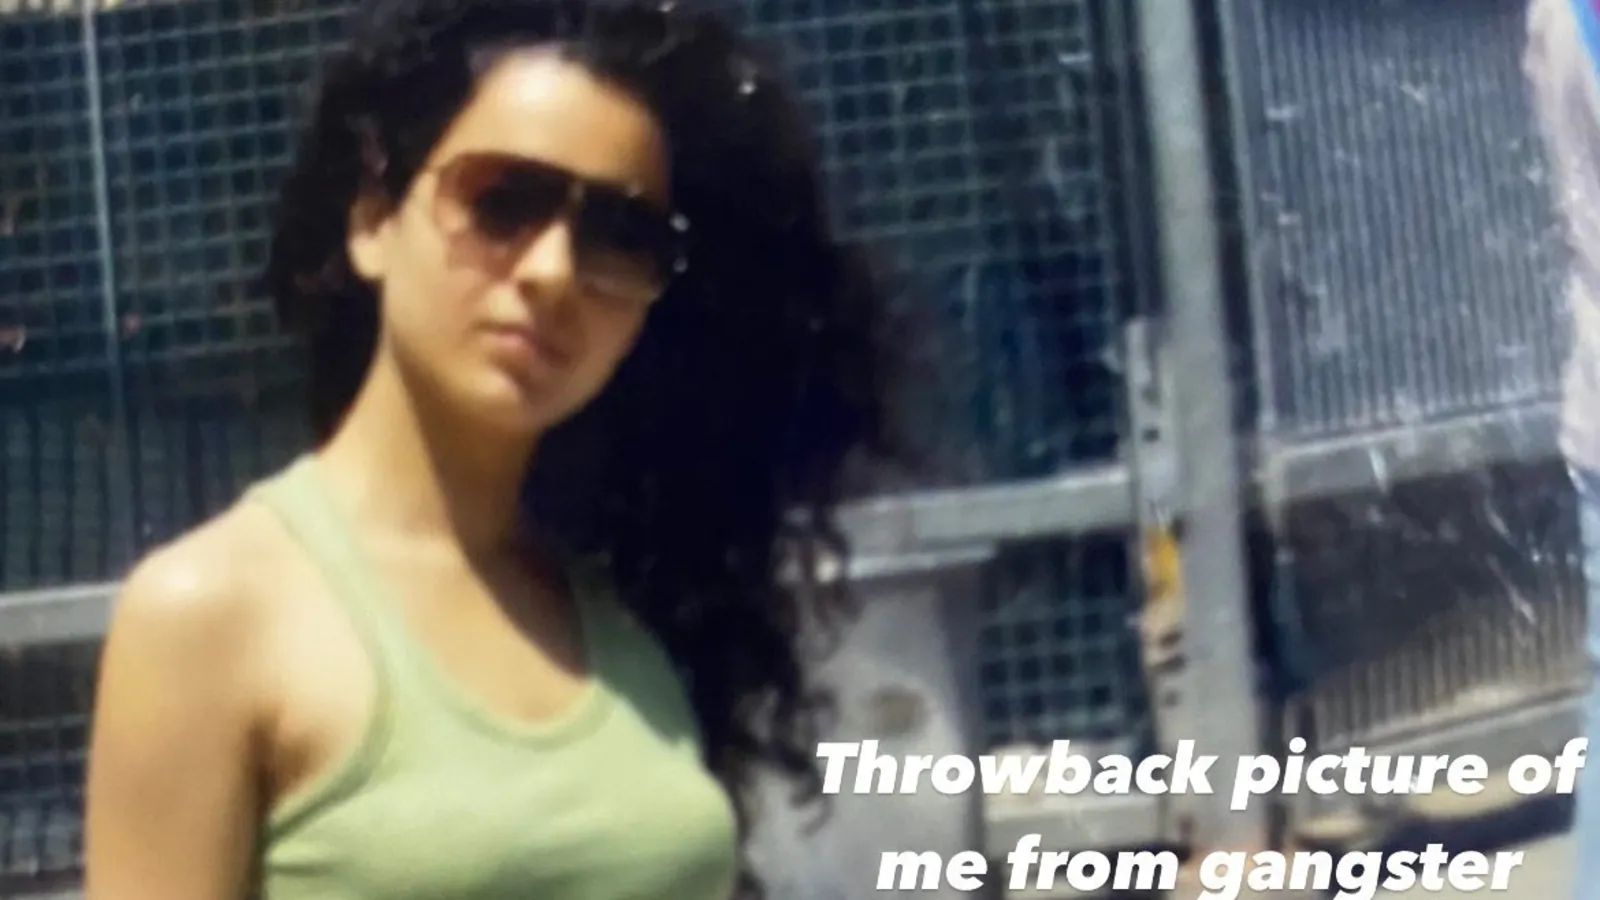 Kangana Ranaut says she was a ‘lost teenager, overconfident’ as she shares throwback pic from ‘Gangster days’. See pic